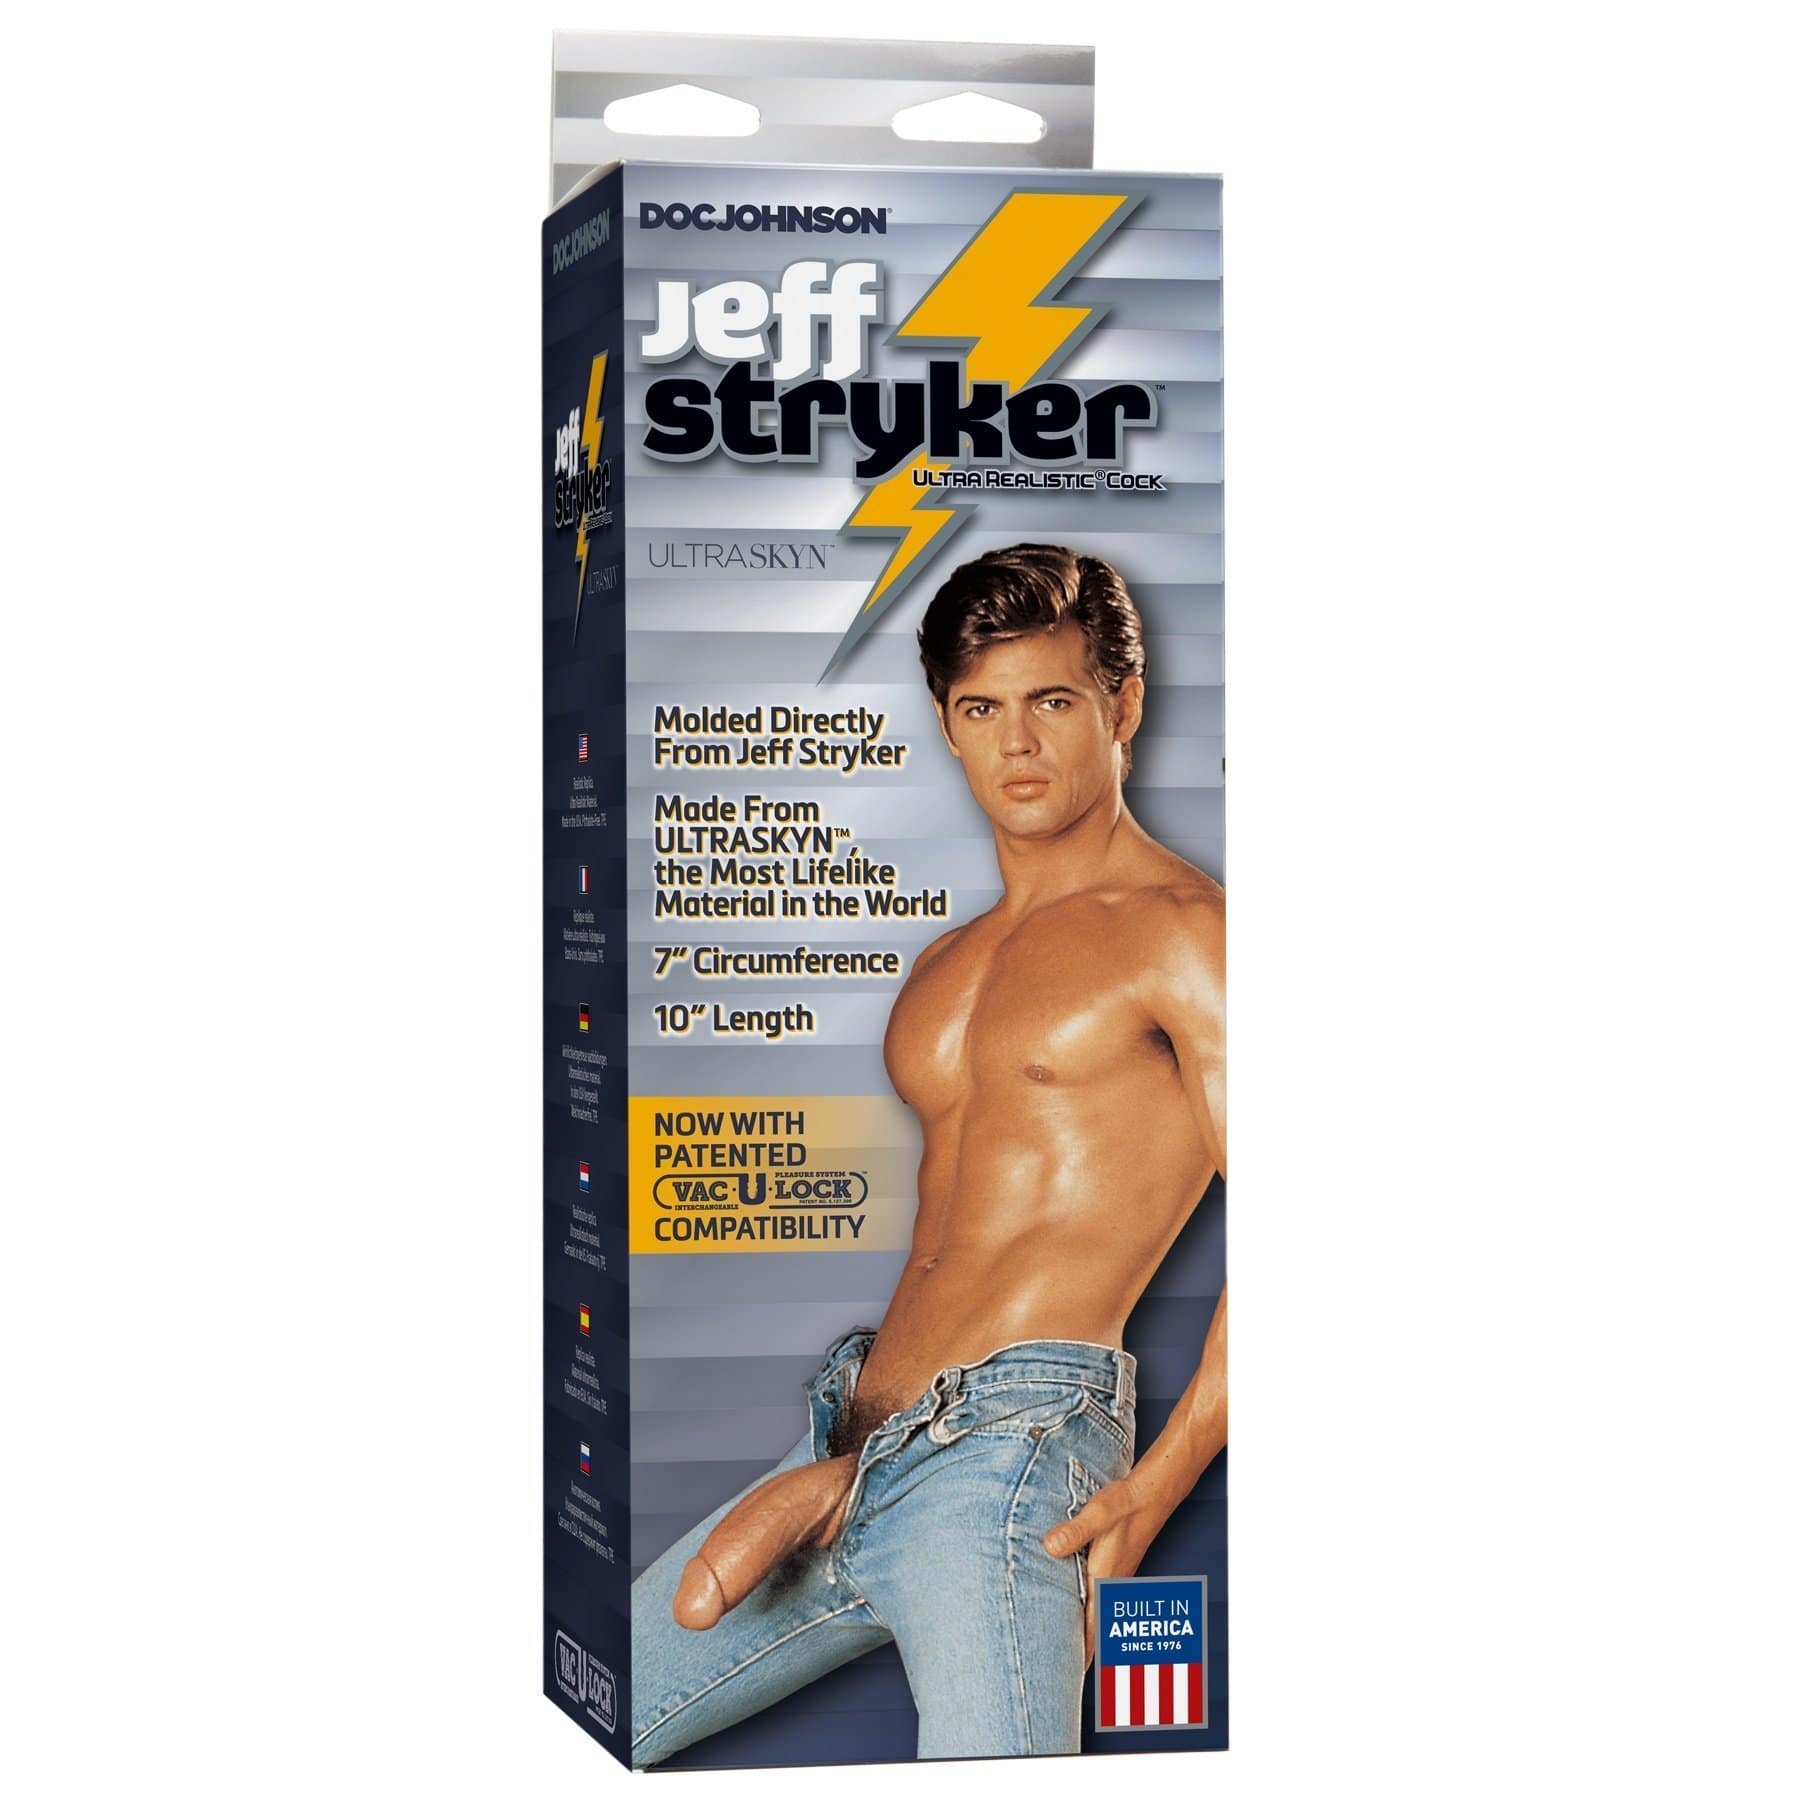 jeff stryker ultraskyn 10 realistic cock with removable vac u lock suction cup